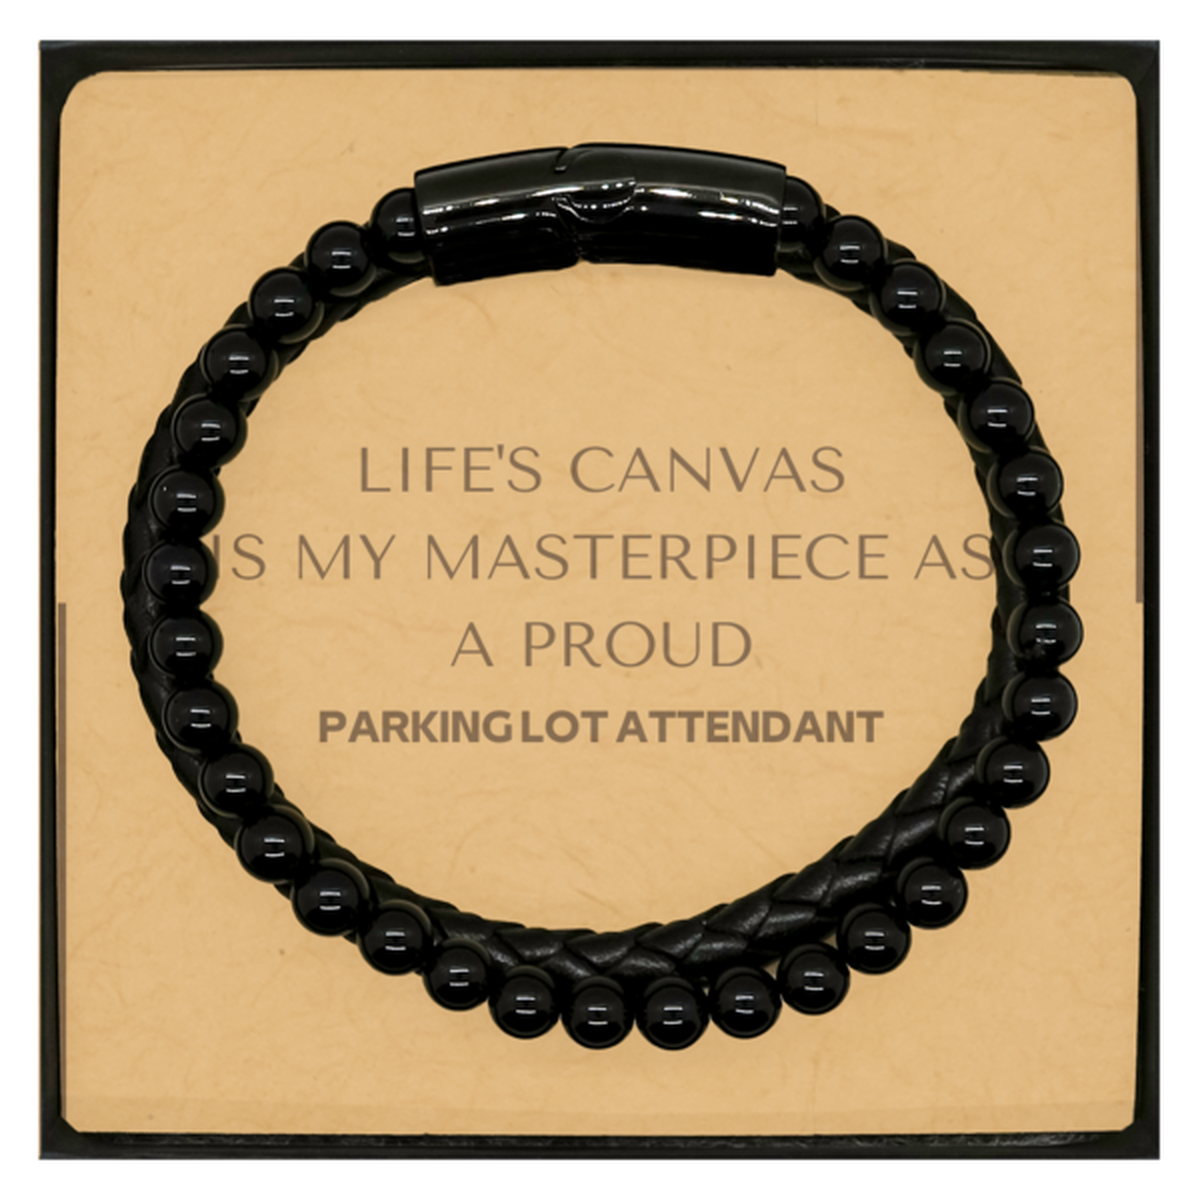 Proud Parking Lot Attendant Gifts, Life's canvas is my masterpiece, Epic Birthday Christmas Unique Stone Leather Bracelets For Parking Lot Attendant, Coworkers, Men, Women, Friends